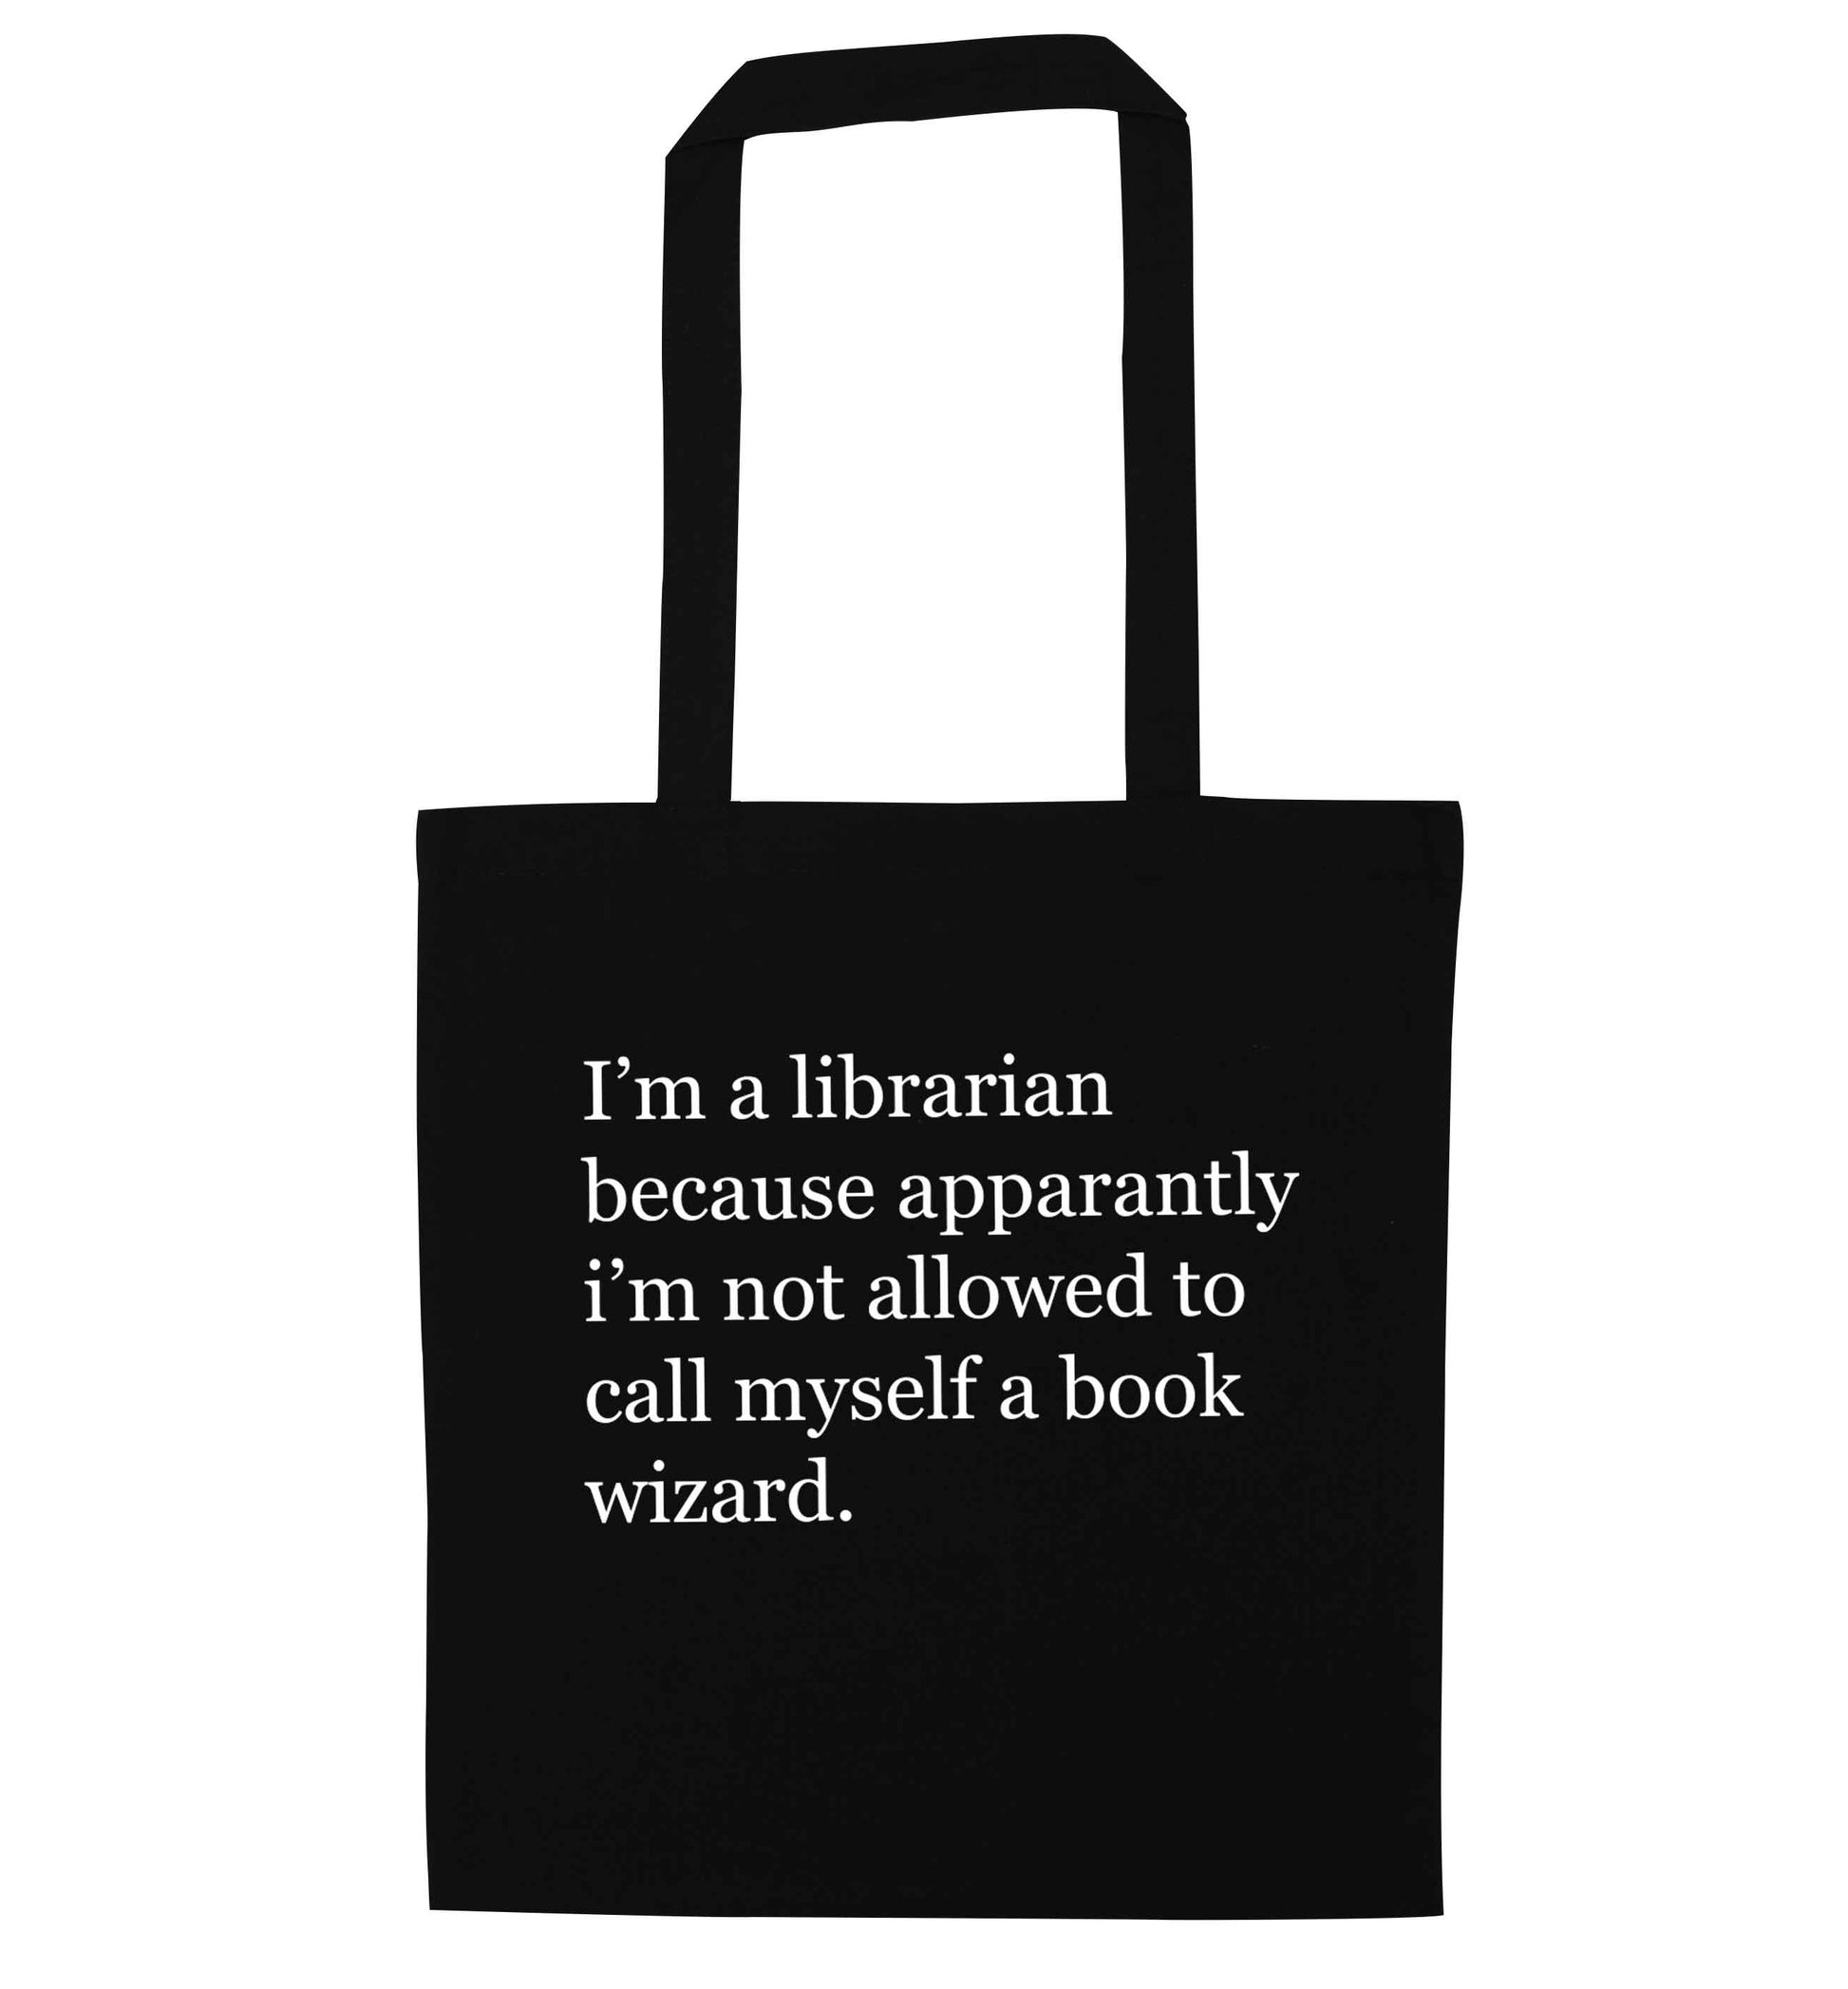 iÕm a librarian because apparantly iÕm not allowed to call myself a book wizard black tote bag